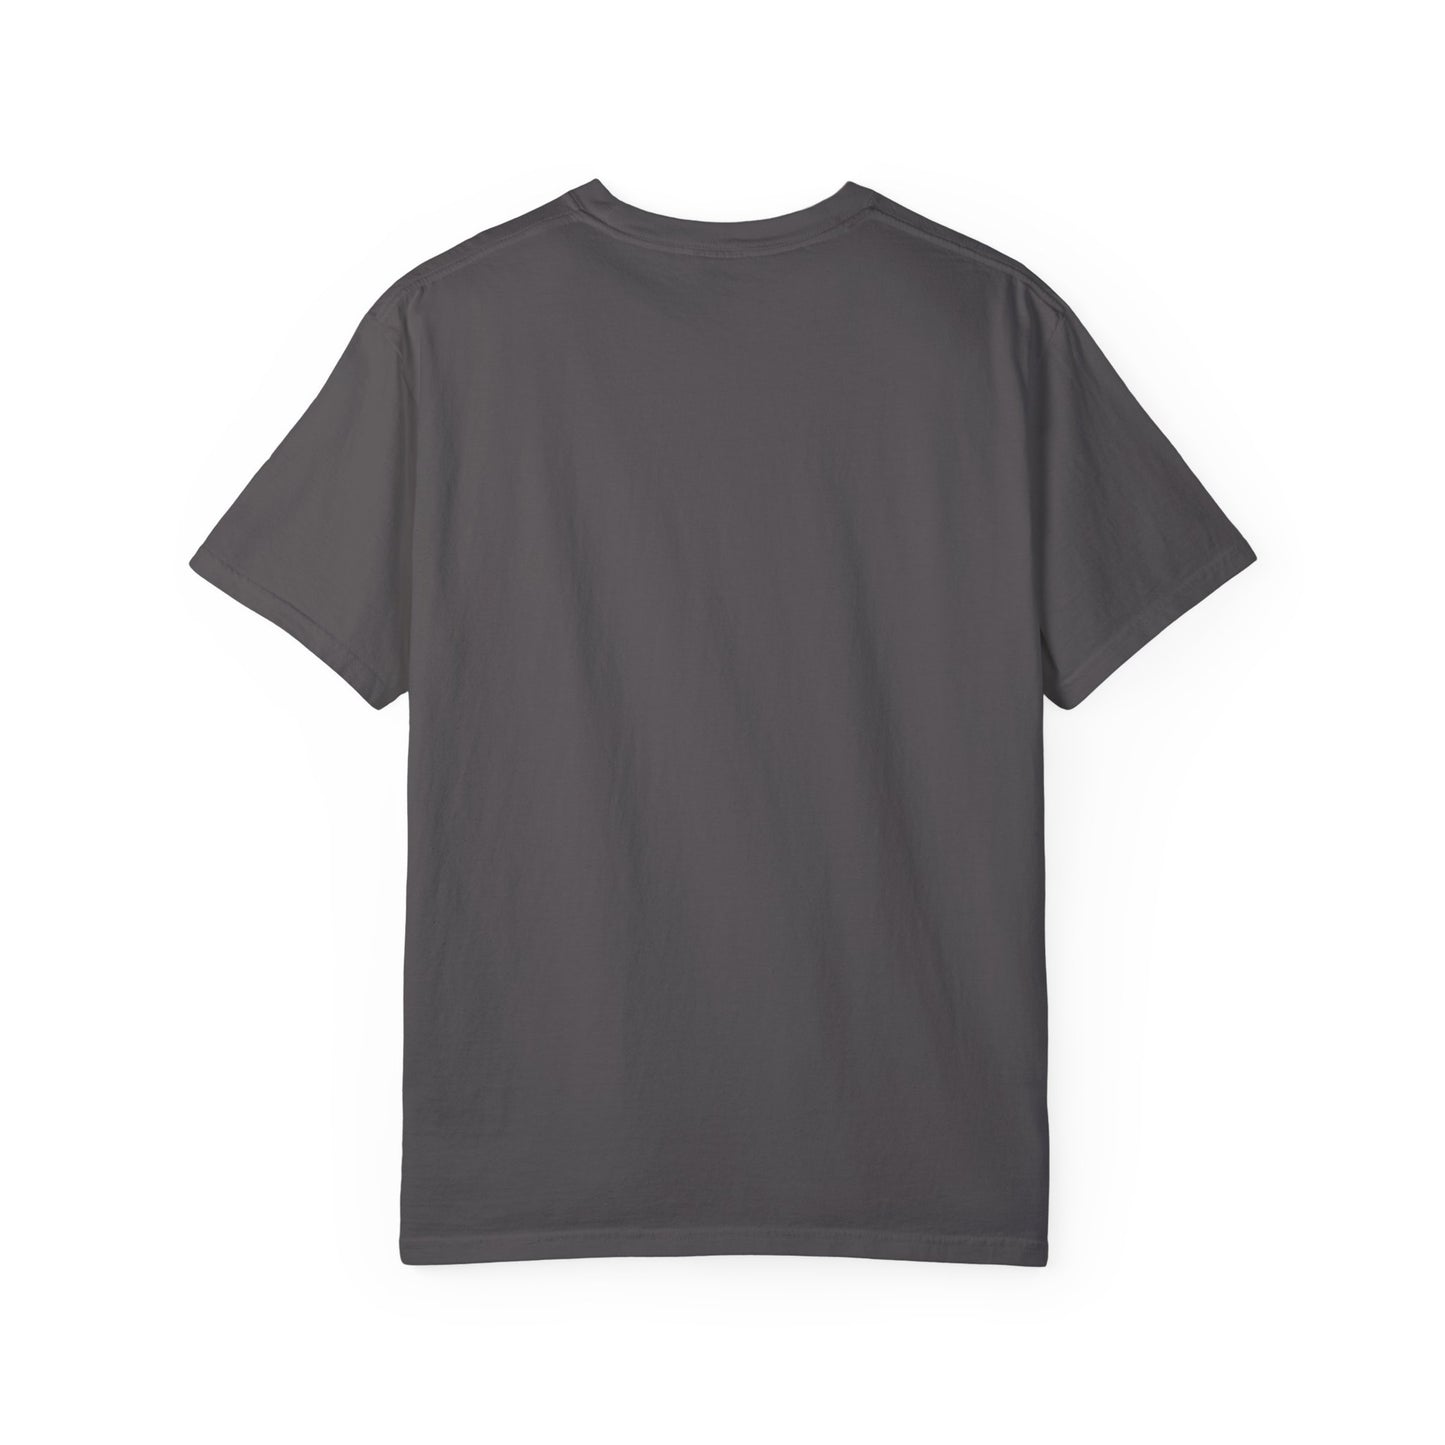 Less is More Garment-Dyed T-shirt